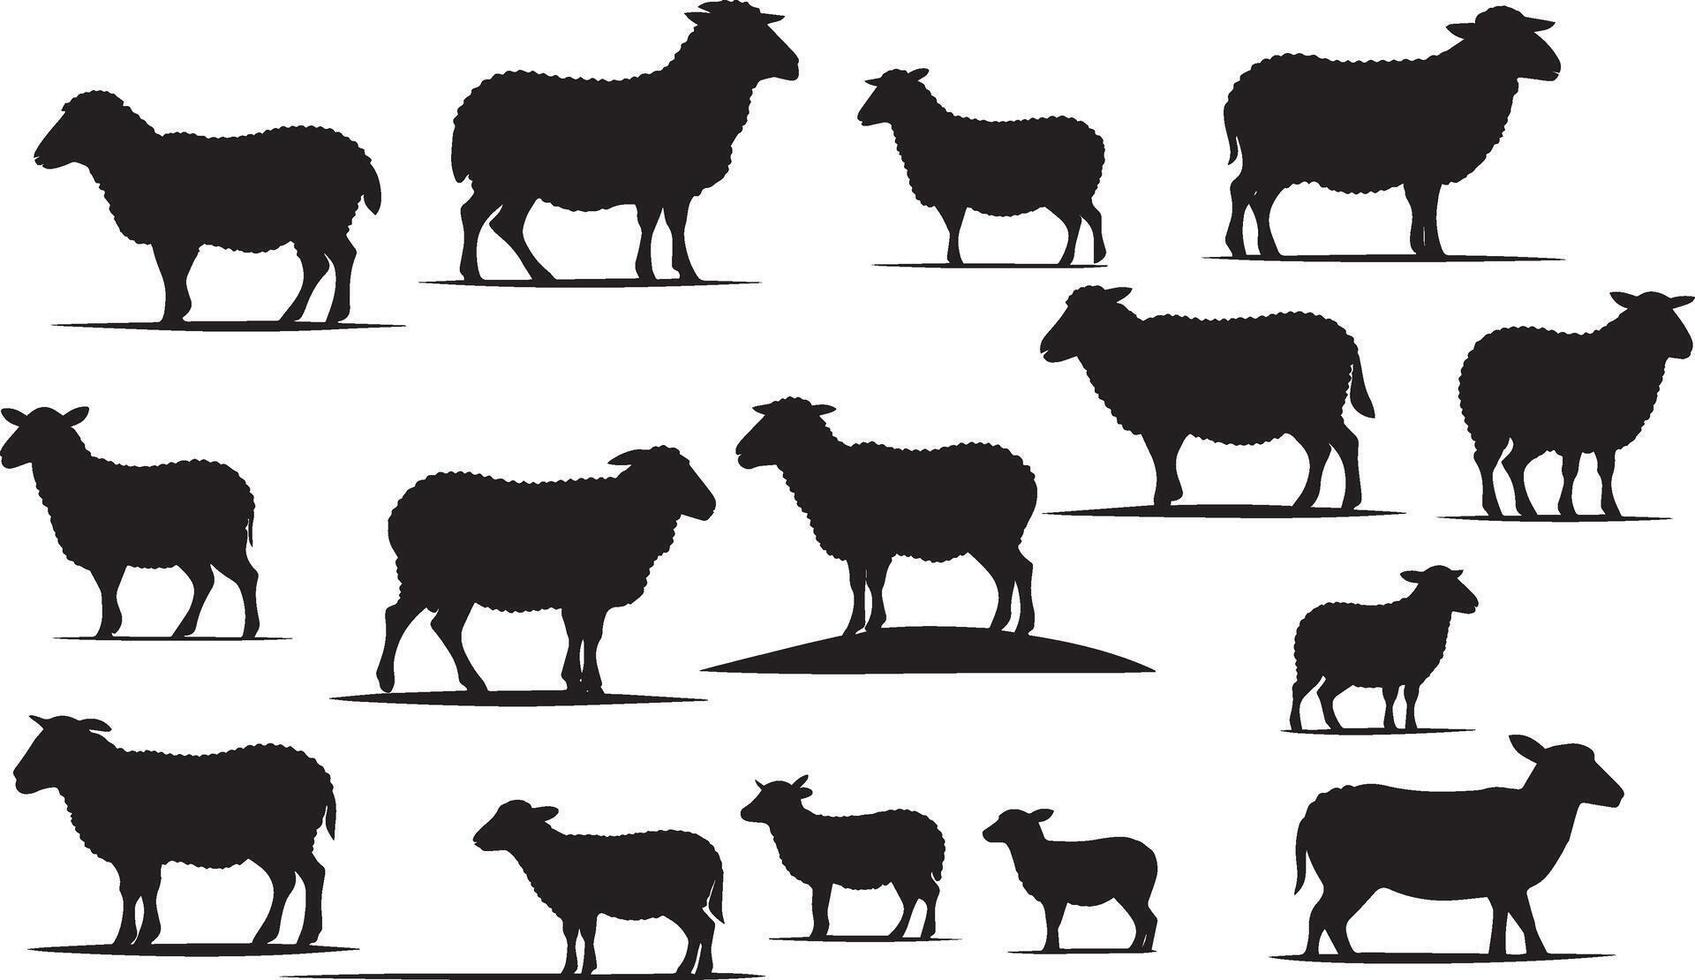 Set of a Sheep silhouette vector